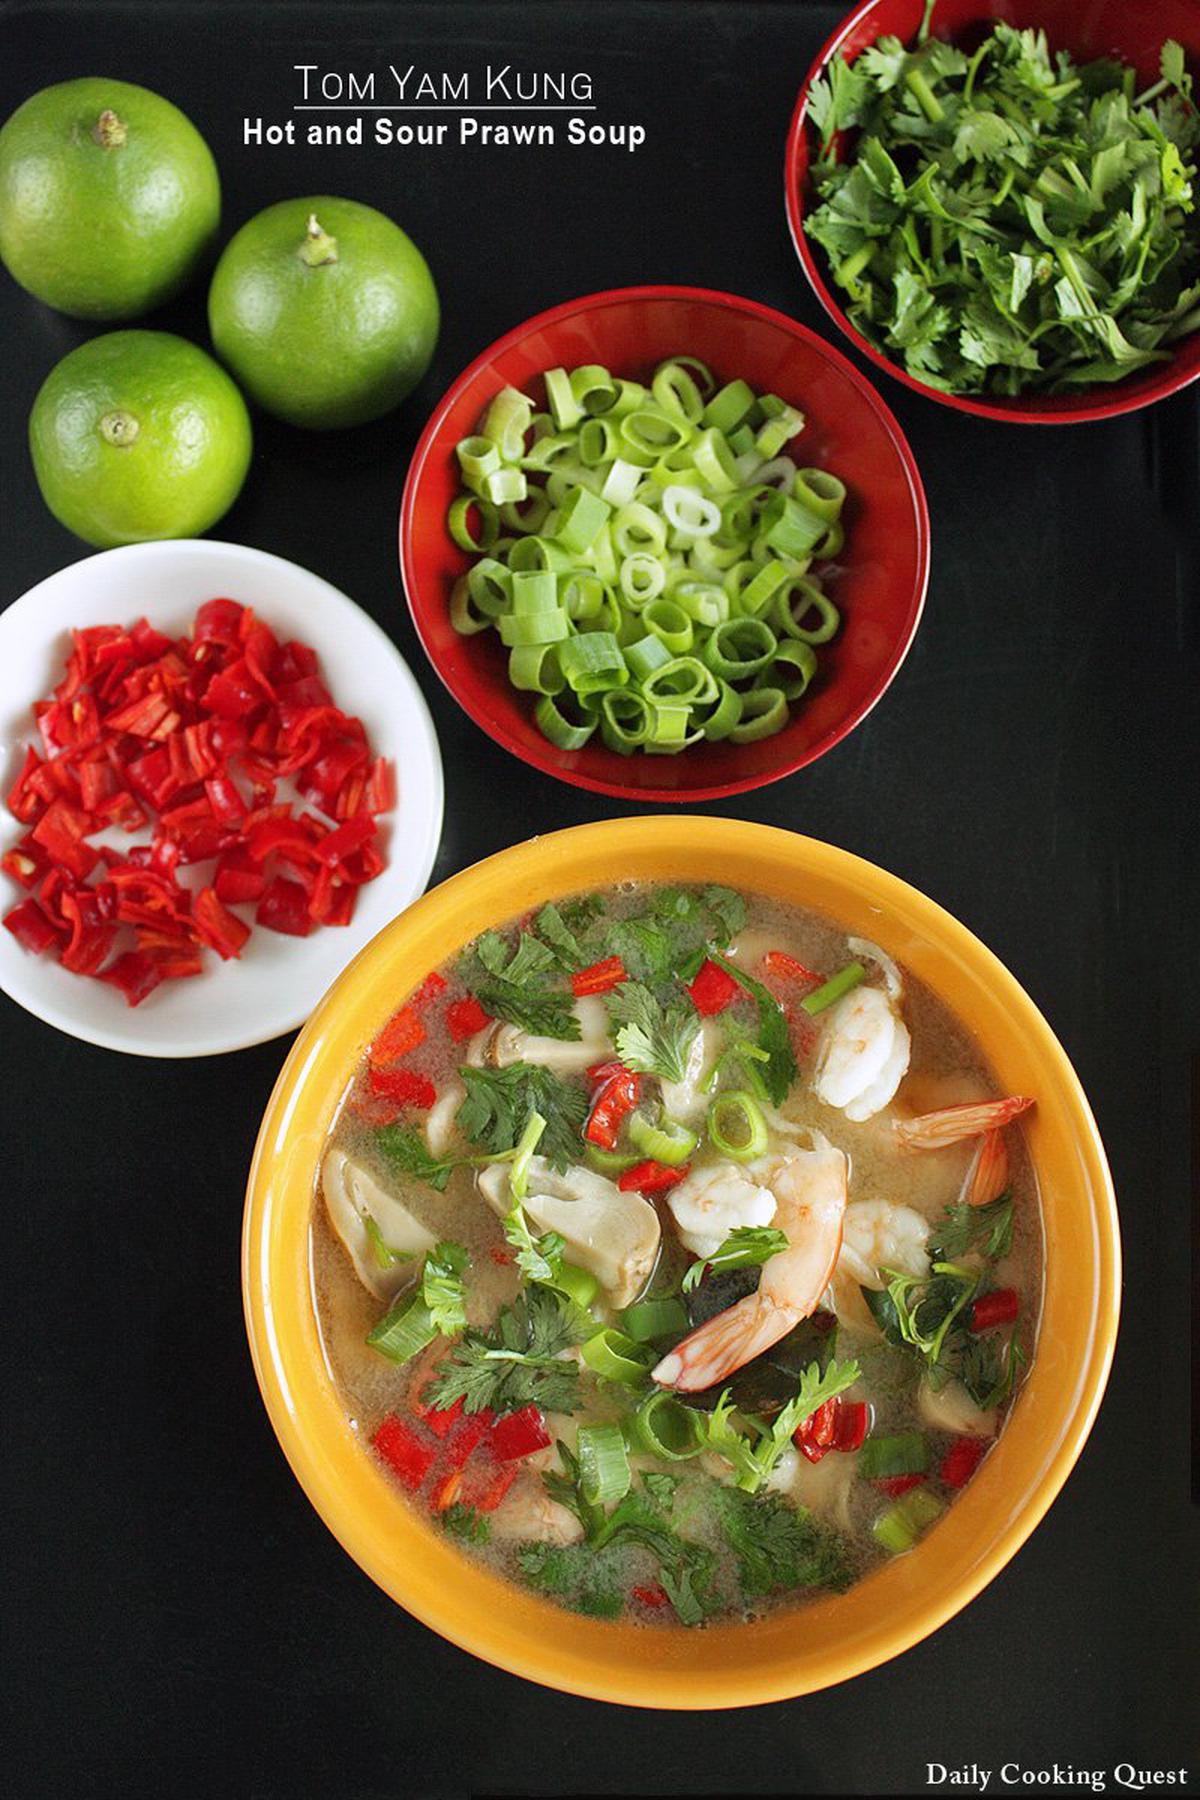 Tom Yam Kung - Hot and Sour Prawn Soup